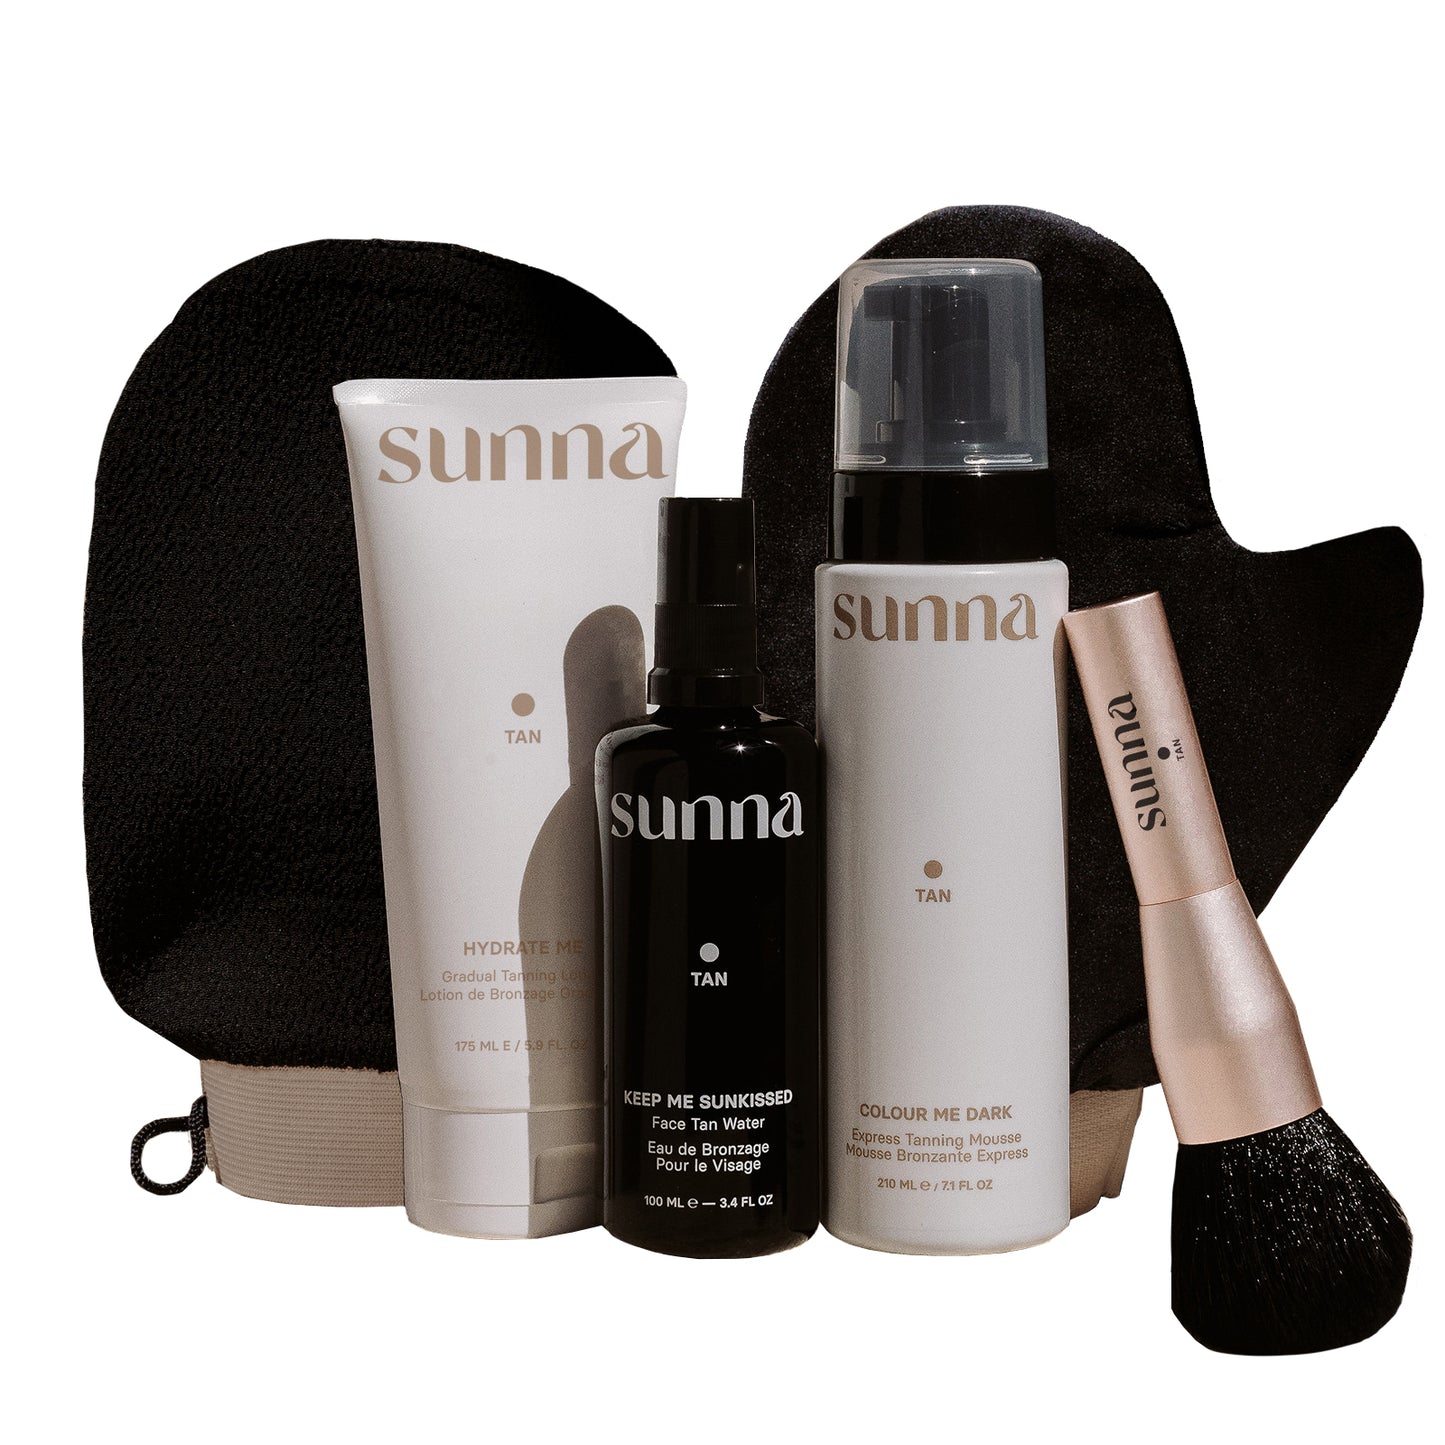 Sunna's Top Sellers